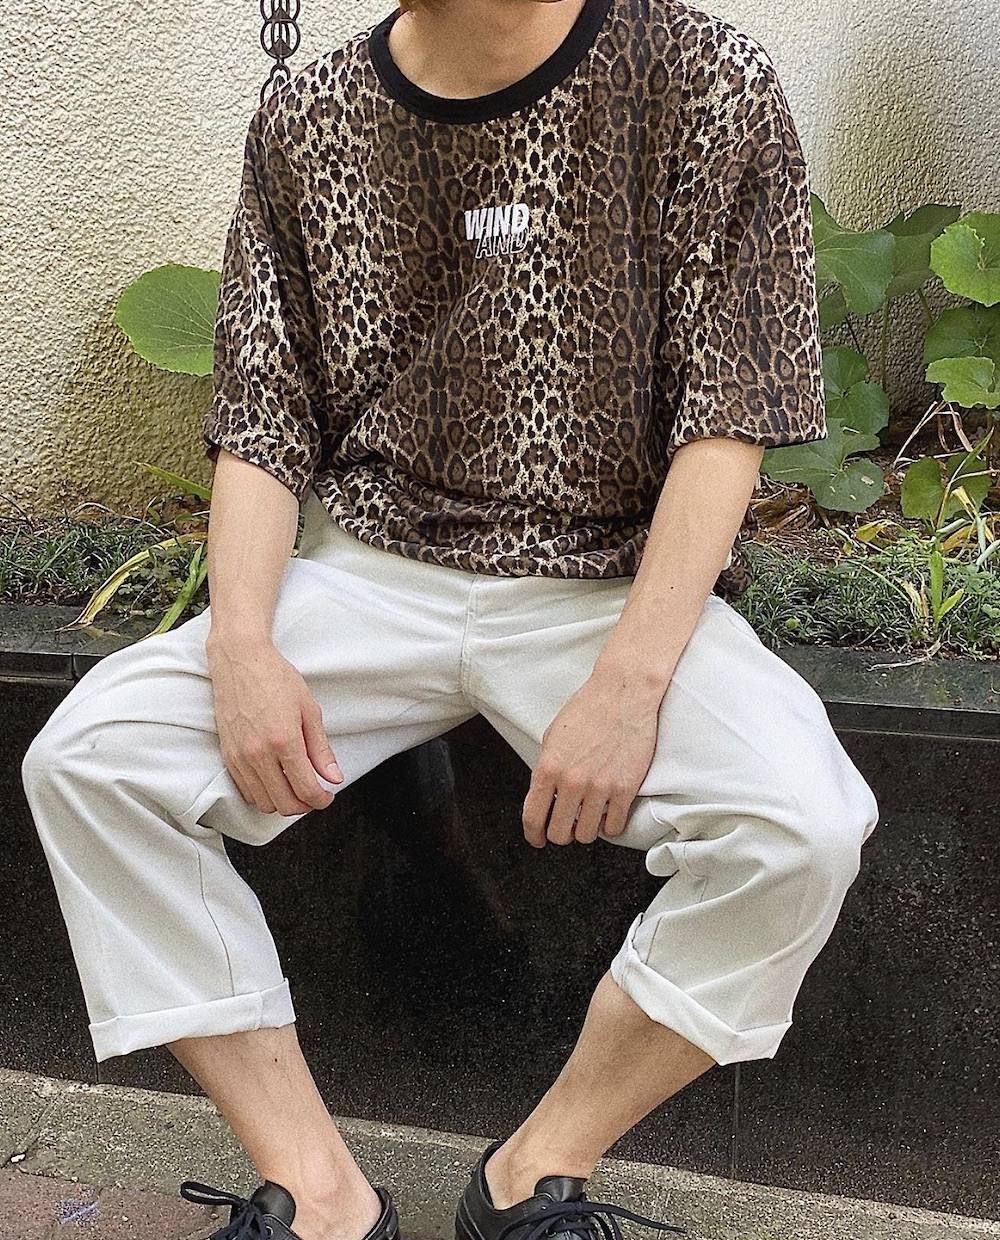 WIND AND SEA 「WDS LEOPARD Riversible CUT-SEWN」 6月20日発売 | mark